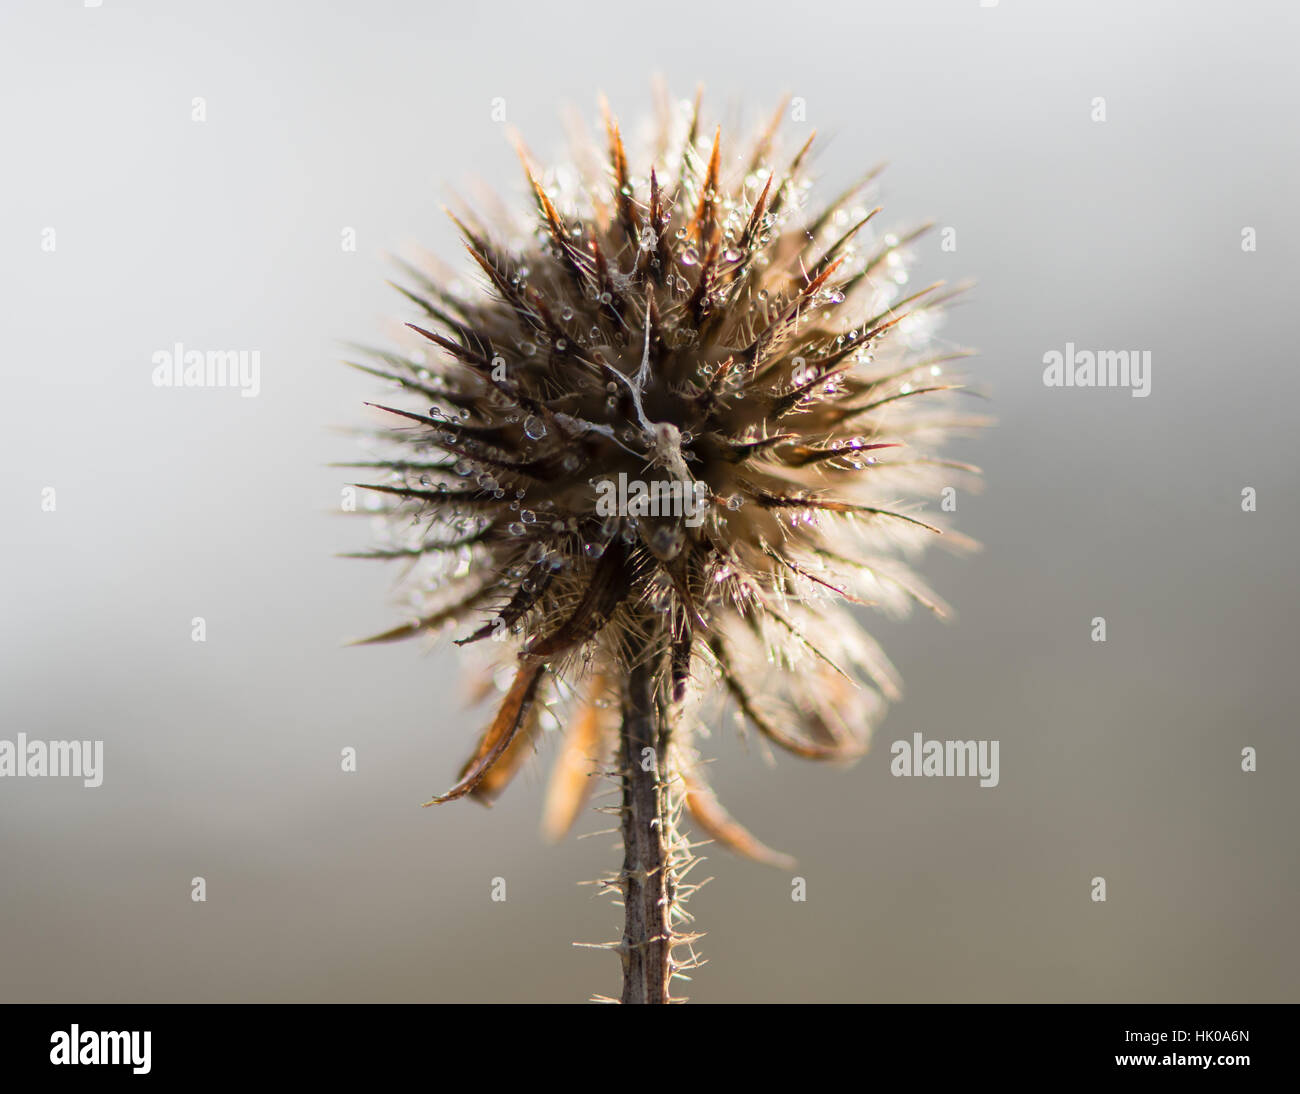 Small teasel (Dipsacus pilosus) seed head in winter. Dead inflorescence covered in melting frost in the family Dipsaceae Stock Photo